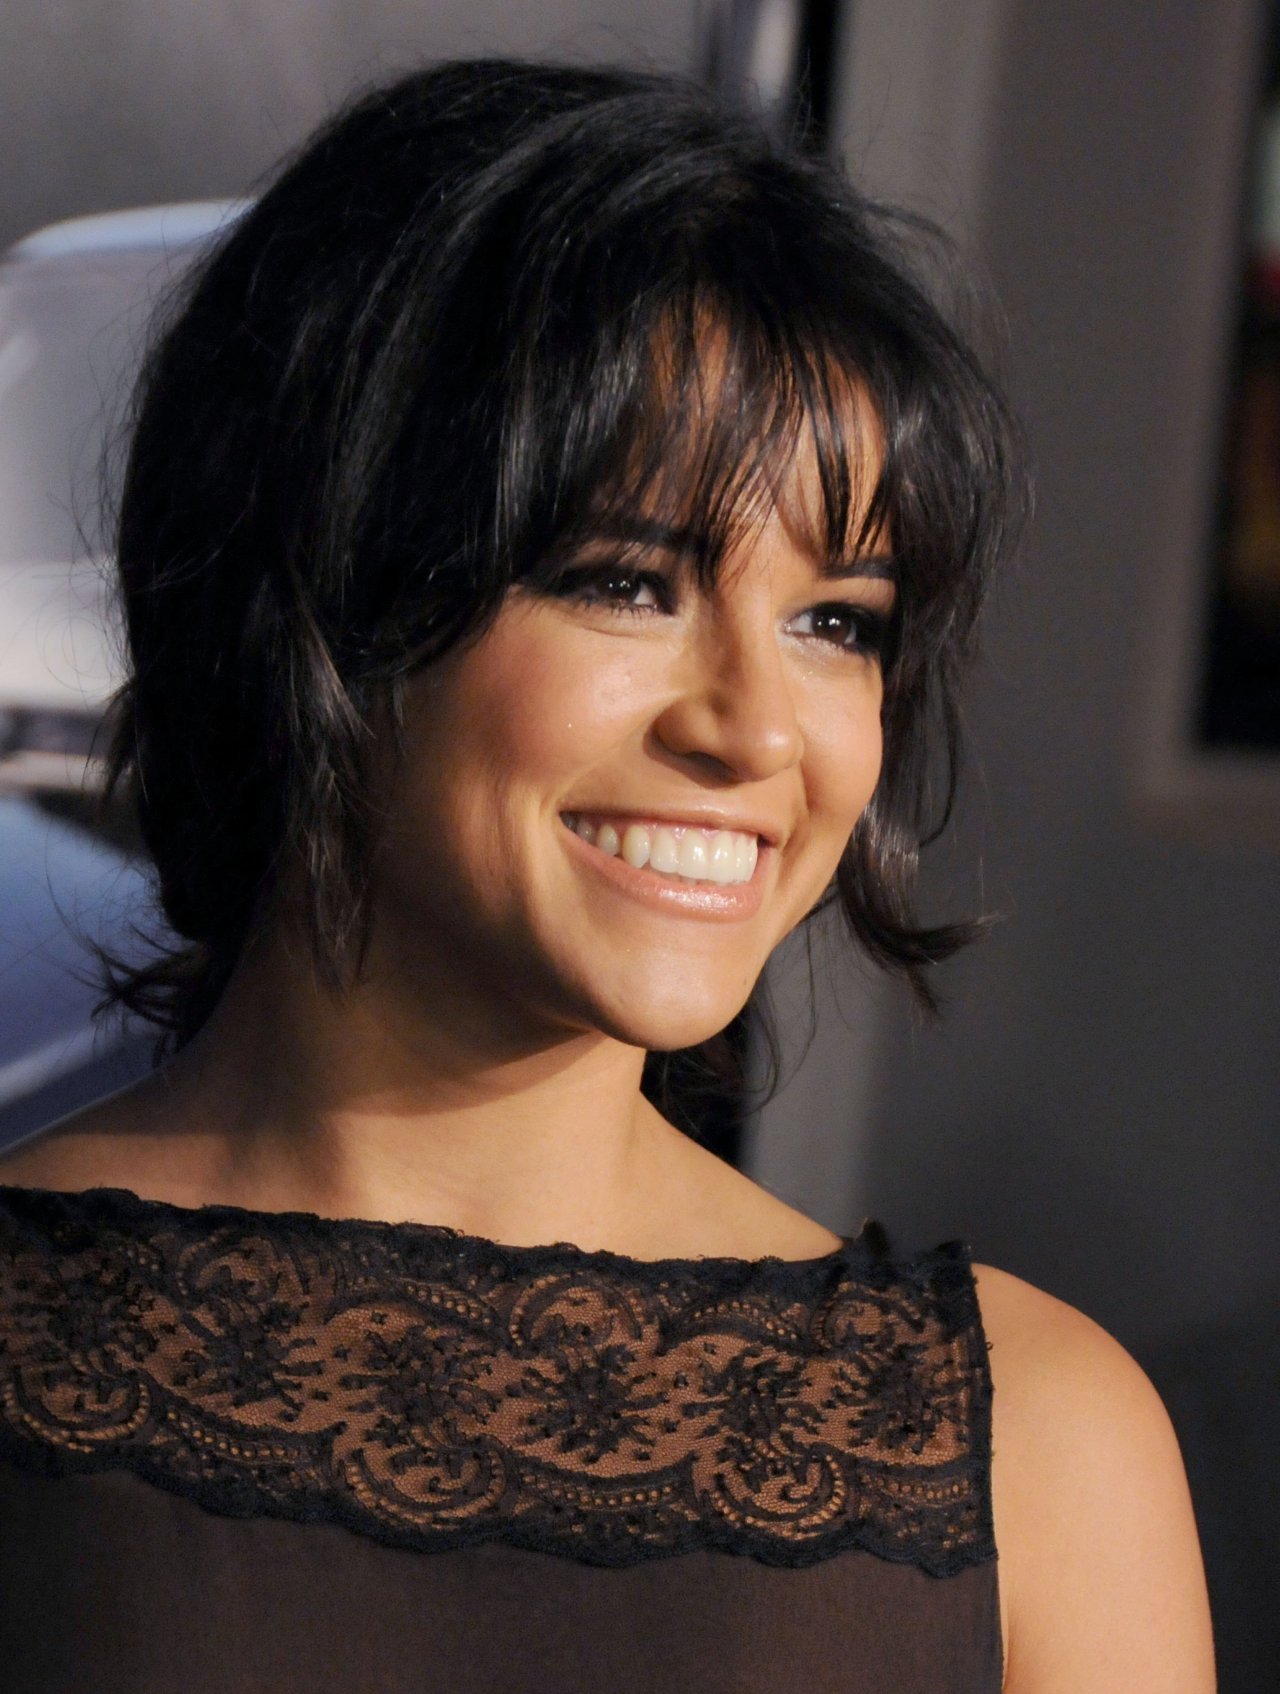 Michelle Rodriguez leaked wallpapers